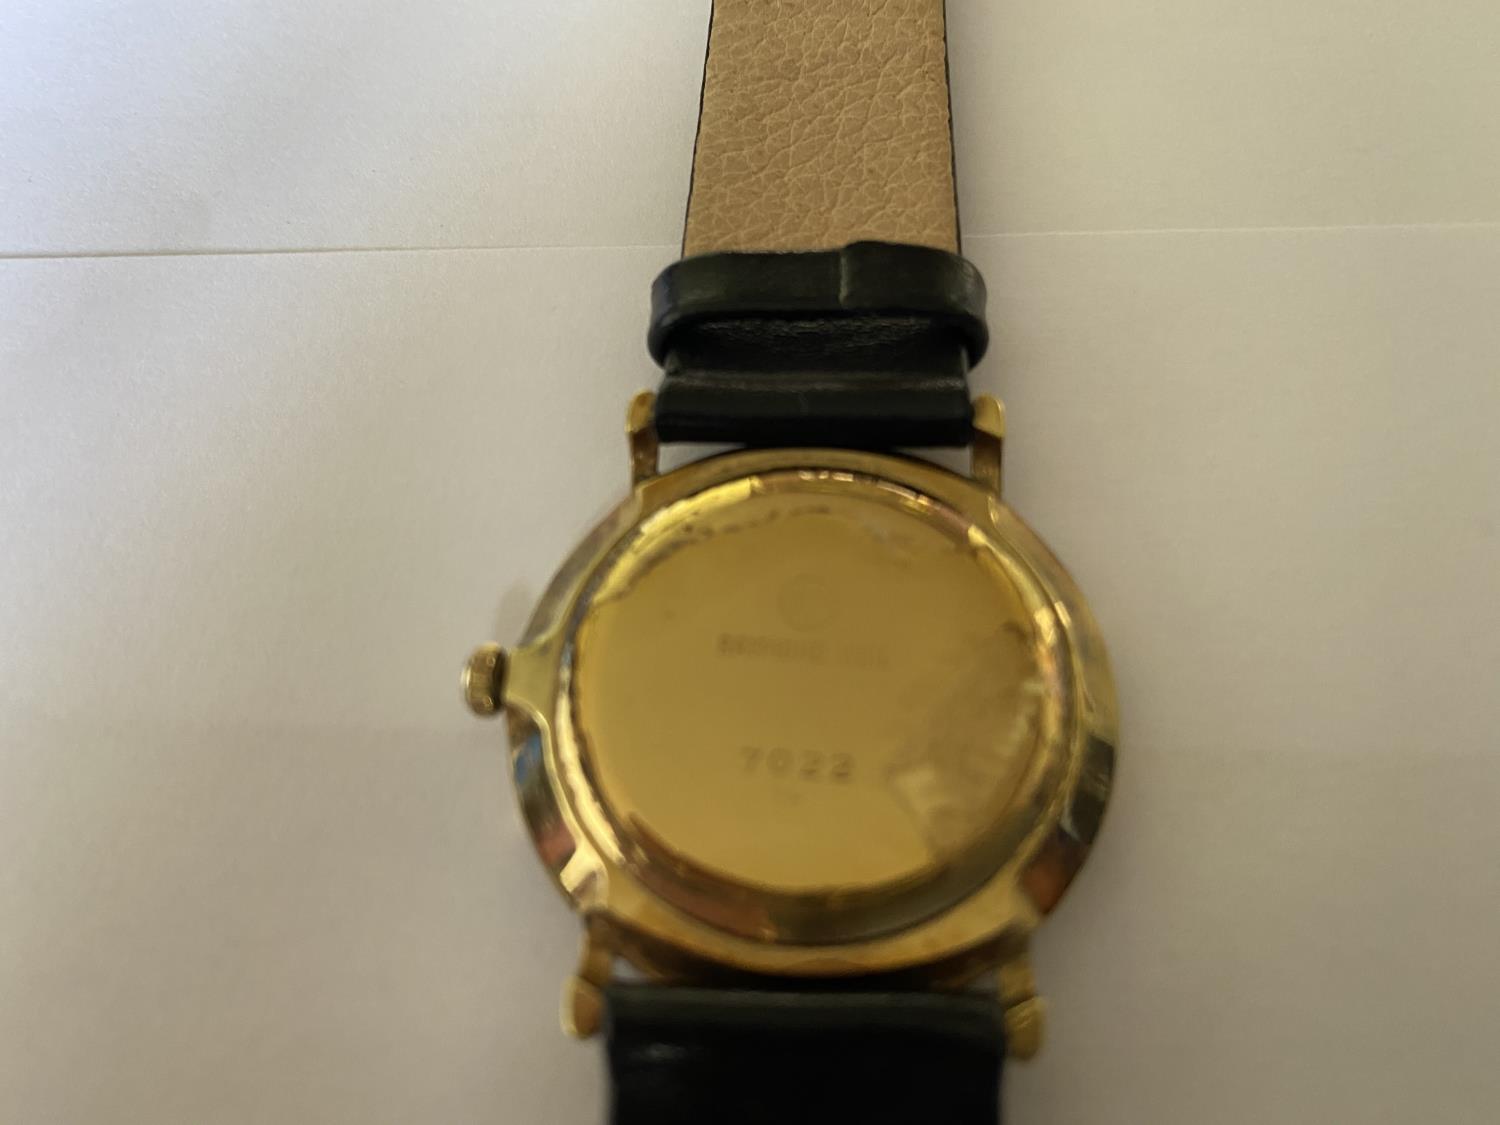 A RAYMOND WEIL GENTLEMAN'S WRIST WATCH, NUMBERED 7022. SIGNED MANUAL WIND MOVEMENT. CHAMPAGNE DIAL - Image 3 of 3